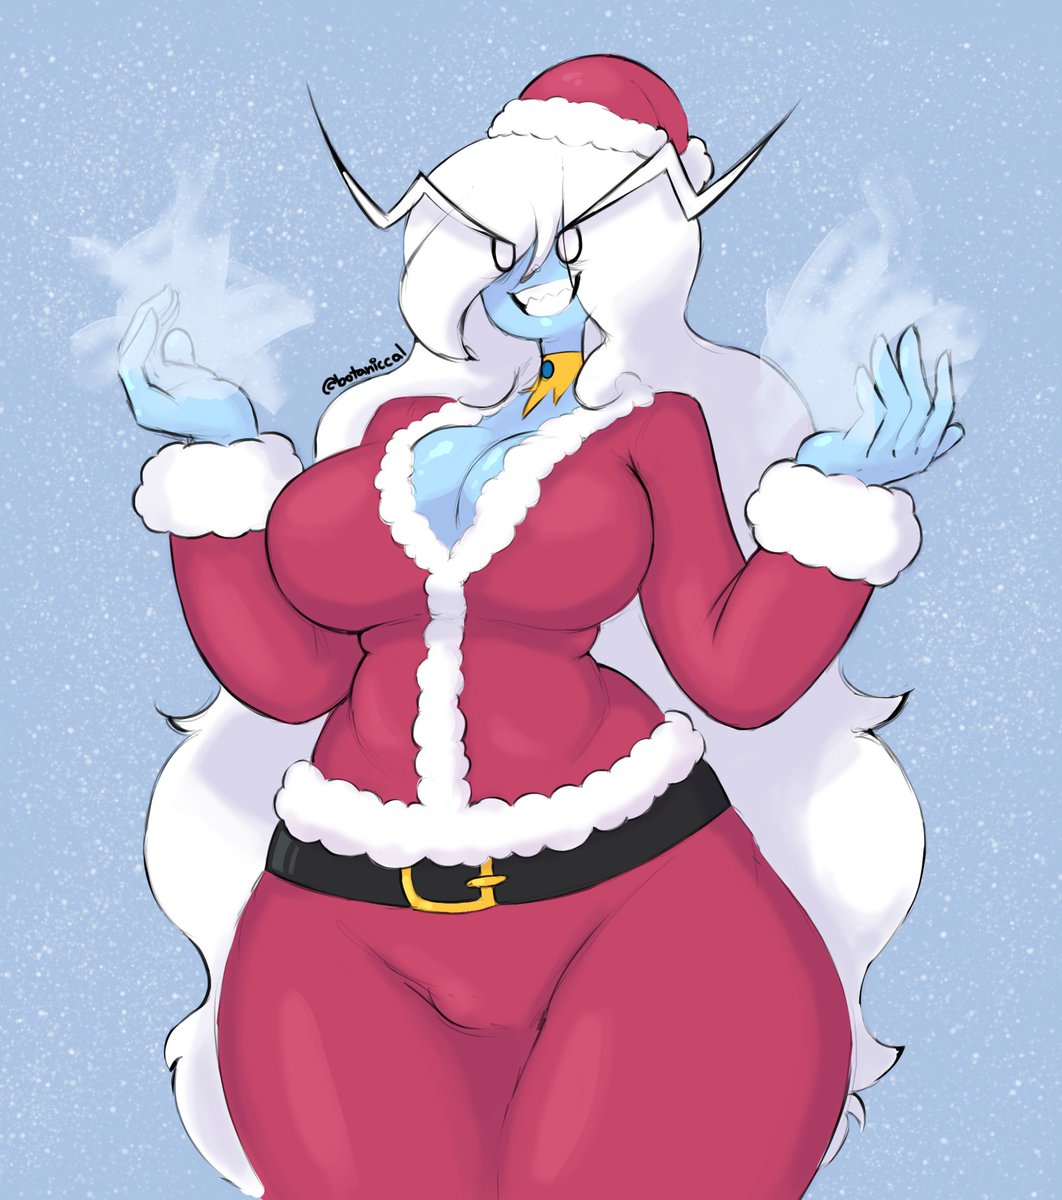 Ice queen repo cuz i don't have anything for today